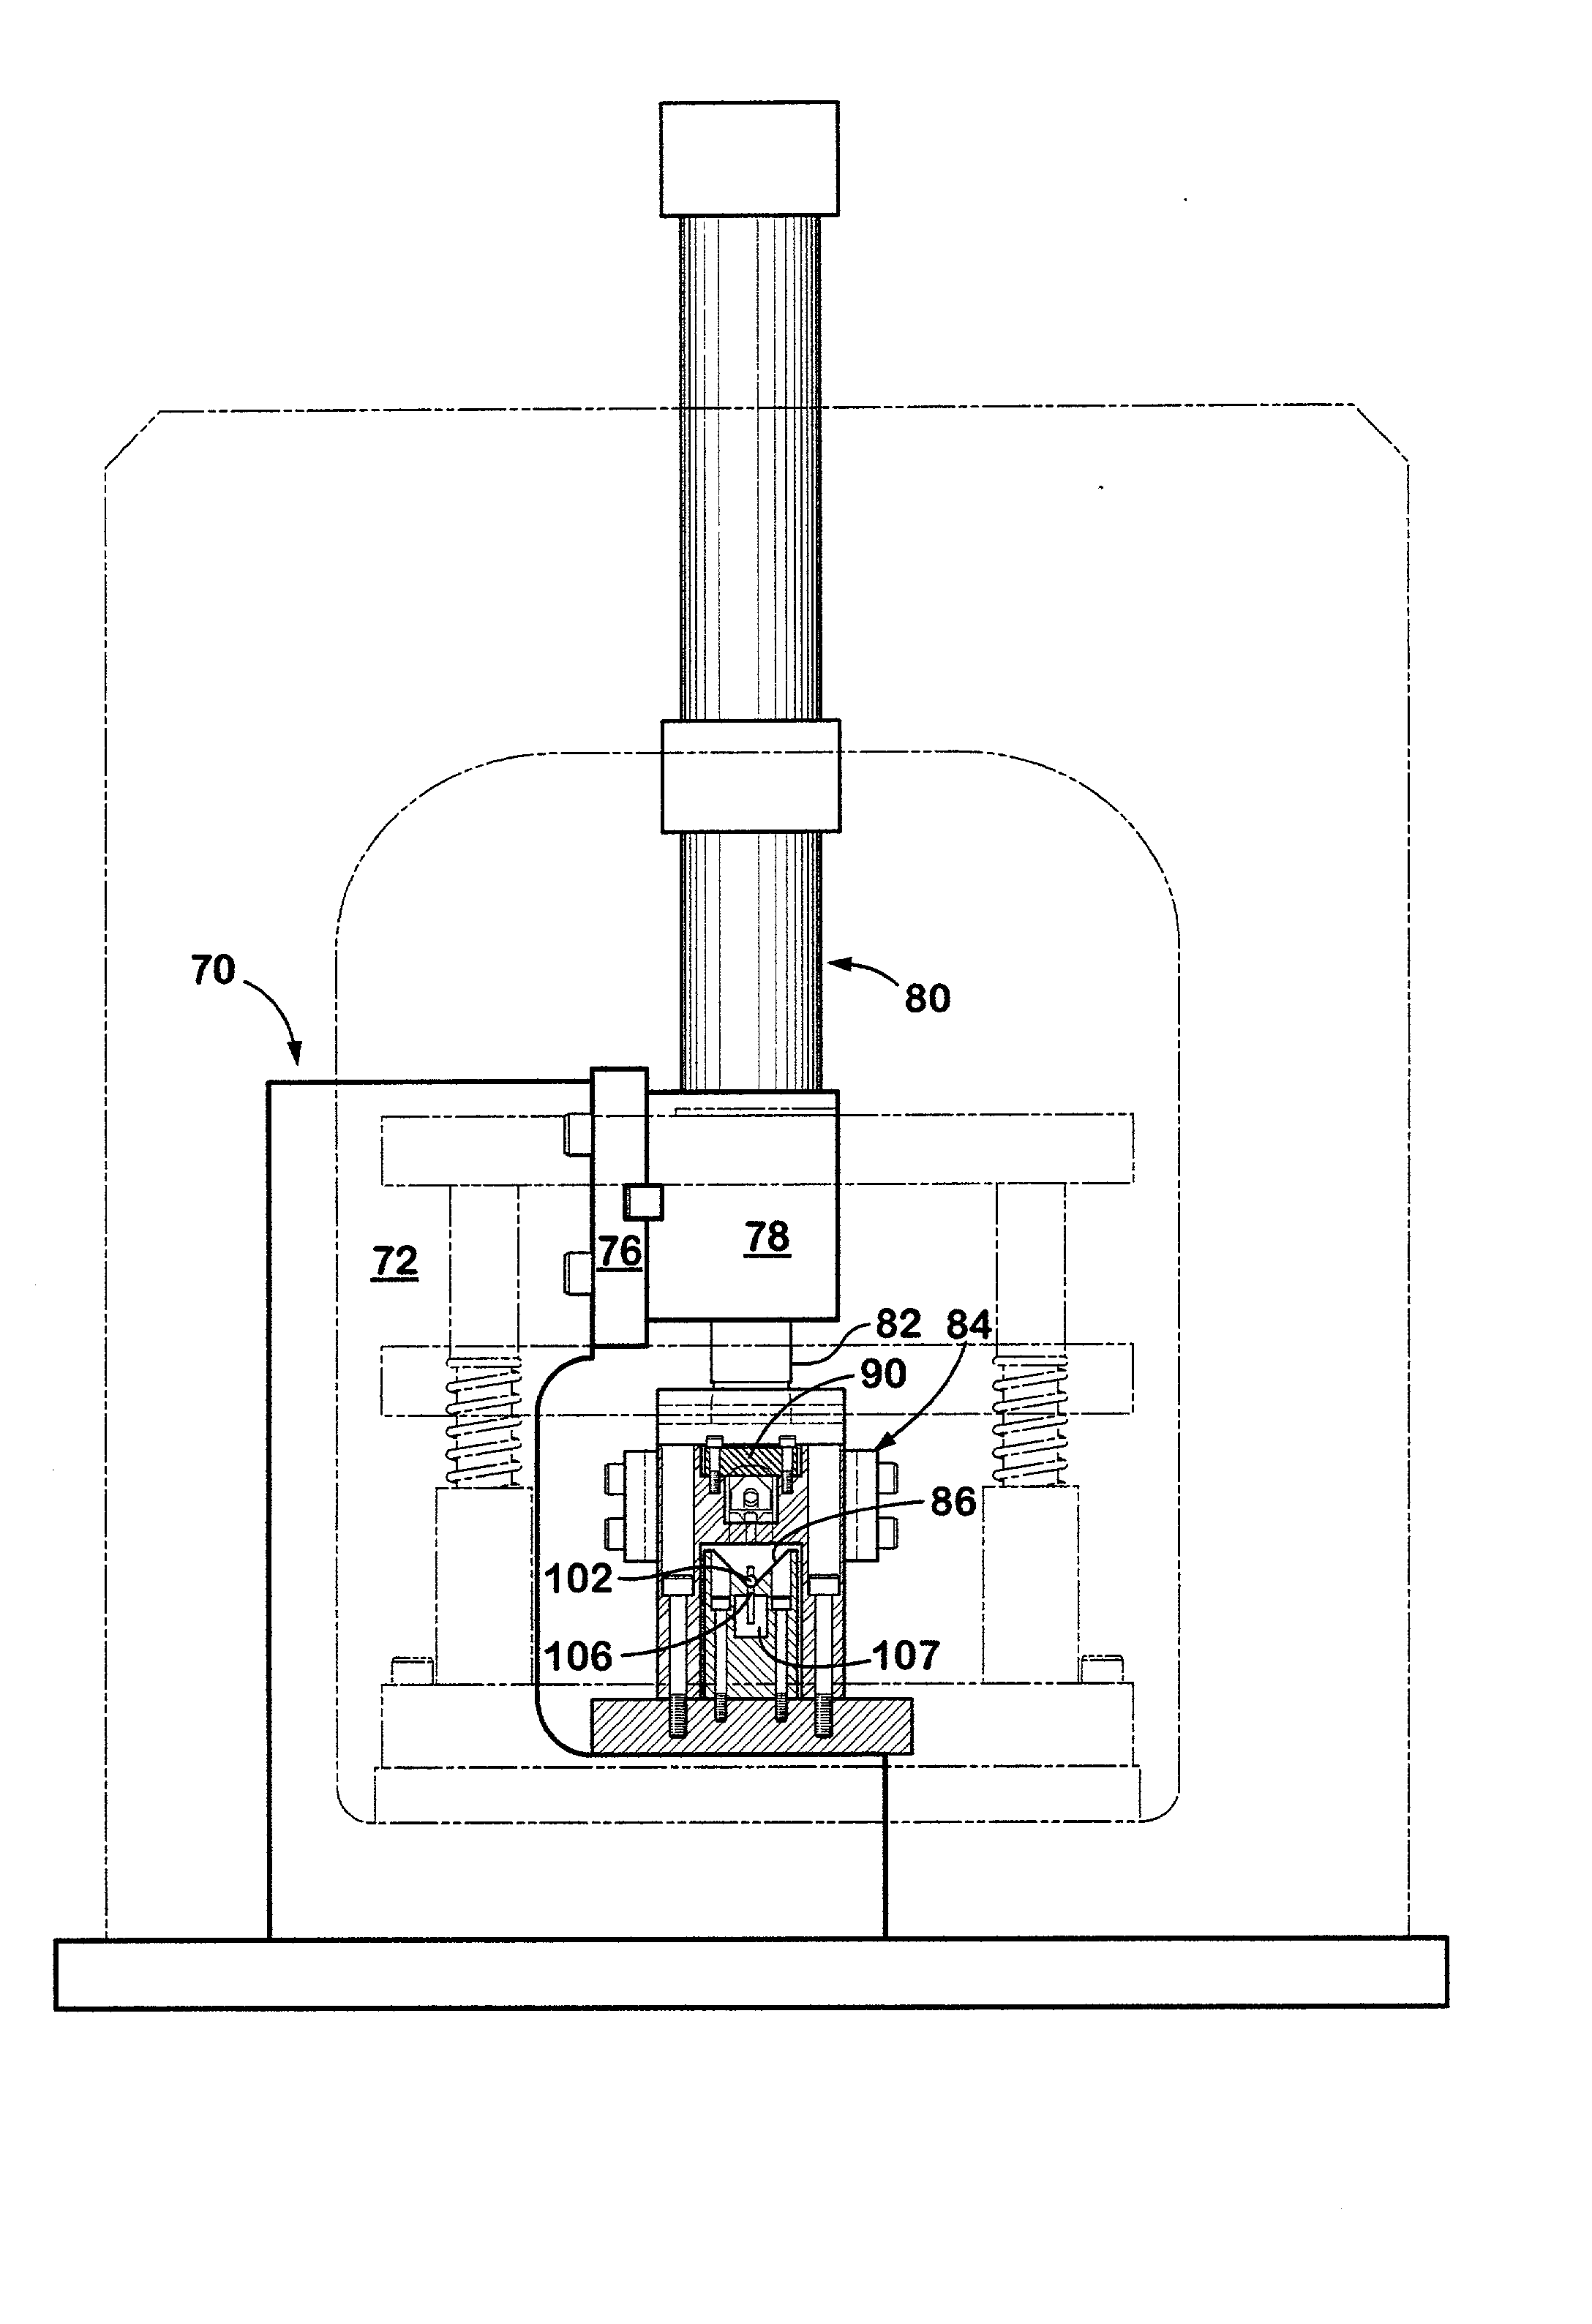 Method and apparatus for manufacturing hinges